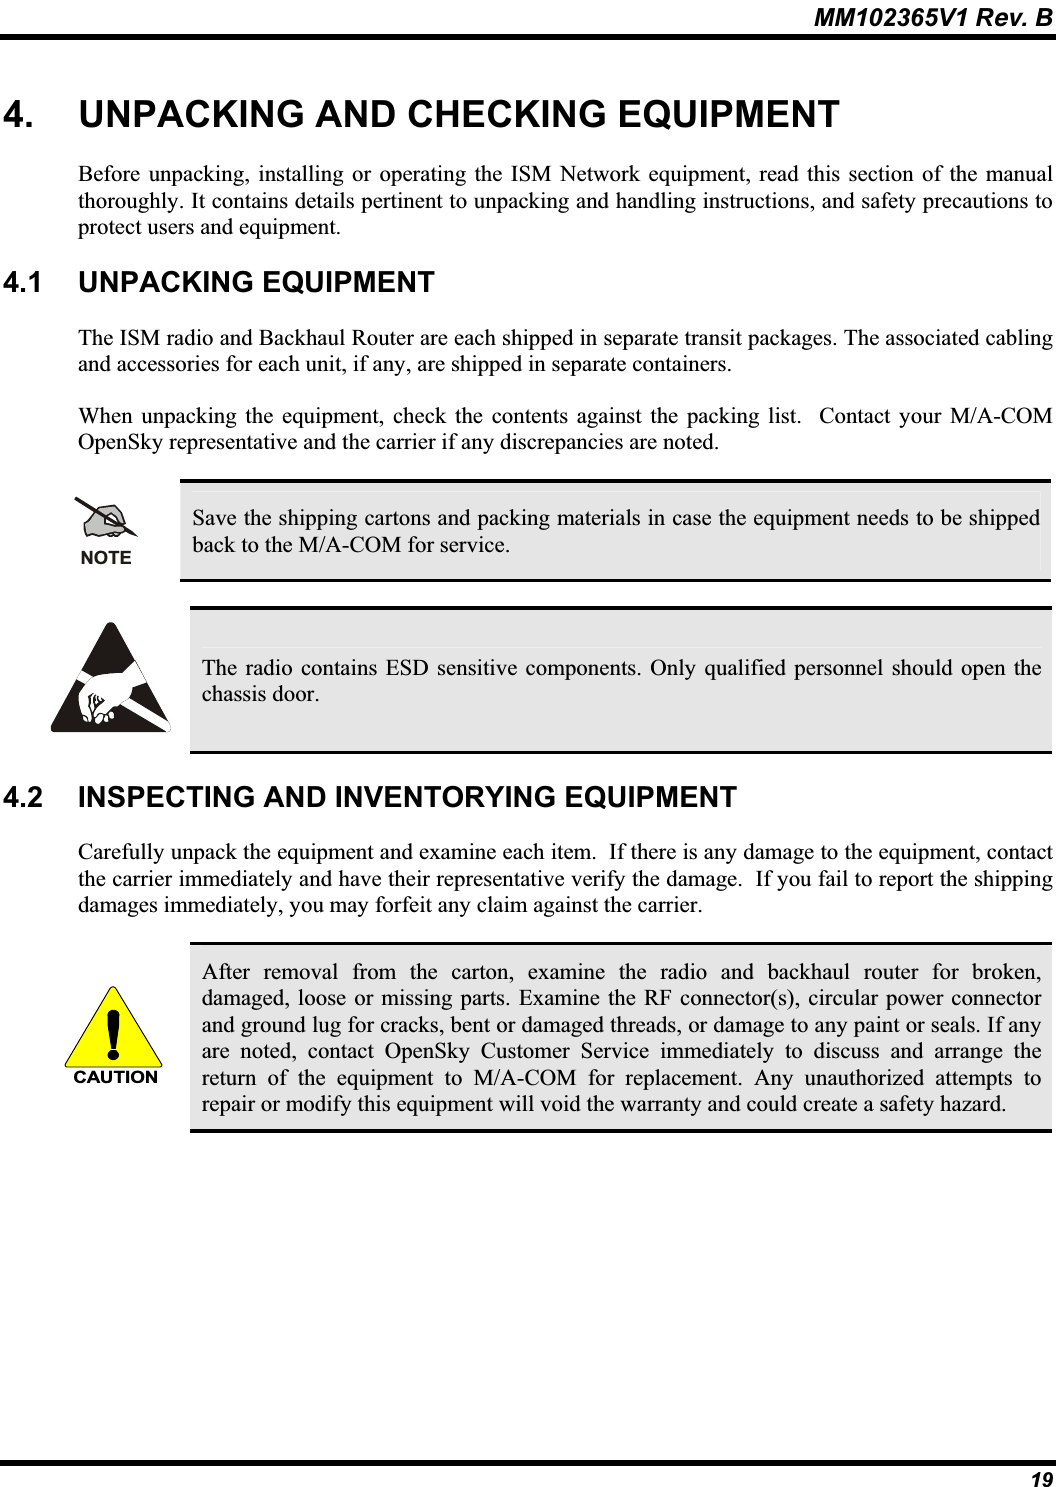 MM102365V1 Rev. B 4. UNPACKING AND CHECKING EQUIPMENT Before unpacking, installing or operating the ISM Network equipment, read this section of the manualthoroughly. It contains details pertinent to unpacking and handling instructions, and safety precautions to protect users and equipment.4.1 UNPACKING EQUIPMENTThe ISM radio and Backhaul Router are each shipped in separate transit packages. The associated cabling and accessories for each unit, if any, are shipped in separate containers. When unpacking the equipment, check the contents against the packing list.  Contact your M/A-COM OpenSky representative and the carrier if any discrepancies are noted. NOTESave the shipping cartons and packing materials in case the equipment needs to be shippedback to the M/A-COM for service.The radio contains ESD sensitive components. Only qualified personnel should open thechassis door. 4.2 INSPECTING AND INVENTORYING EQUIPMENT Carefully unpack the equipment and examine each item. If there is any damage to the equipment, contactthe carrier immediately and have their representative verify the damage.  If you fail to report the shipping damages immediately, you may forfeit any claim against the carrier. CAUTIONAfter removal from the carton, examine the radio and backhaul router for broken, damaged, loose or missing parts. Examine the RF connector(s), circular power connectorand ground lug for cracks, bent or damaged threads, or damage to any paint or seals. If anyare noted, contact OpenSky Customer Service immediately to discuss and arrange thereturn of the equipment to M/A-COM for replacement. Any unauthorized attempts to repair or modify this equipment will void the warranty and could create a safety hazard. 19